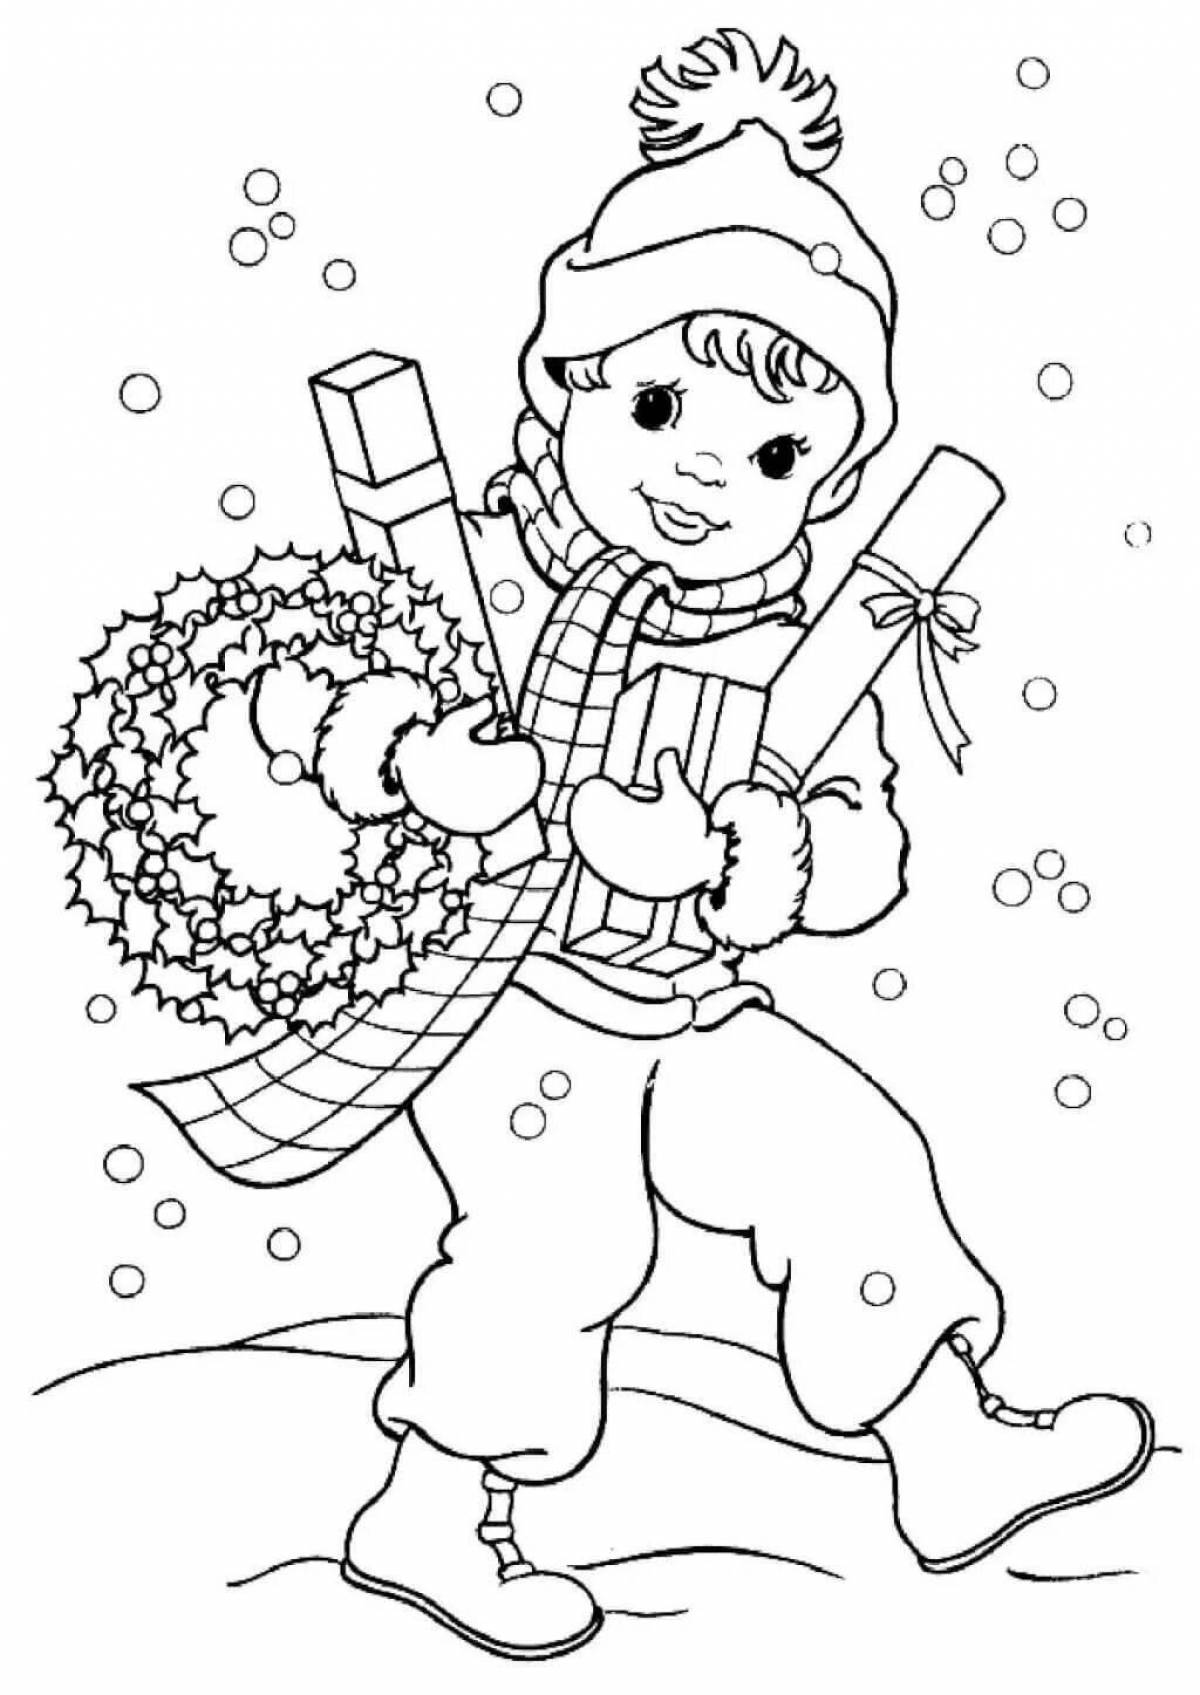 Charming winter coloring book for boys